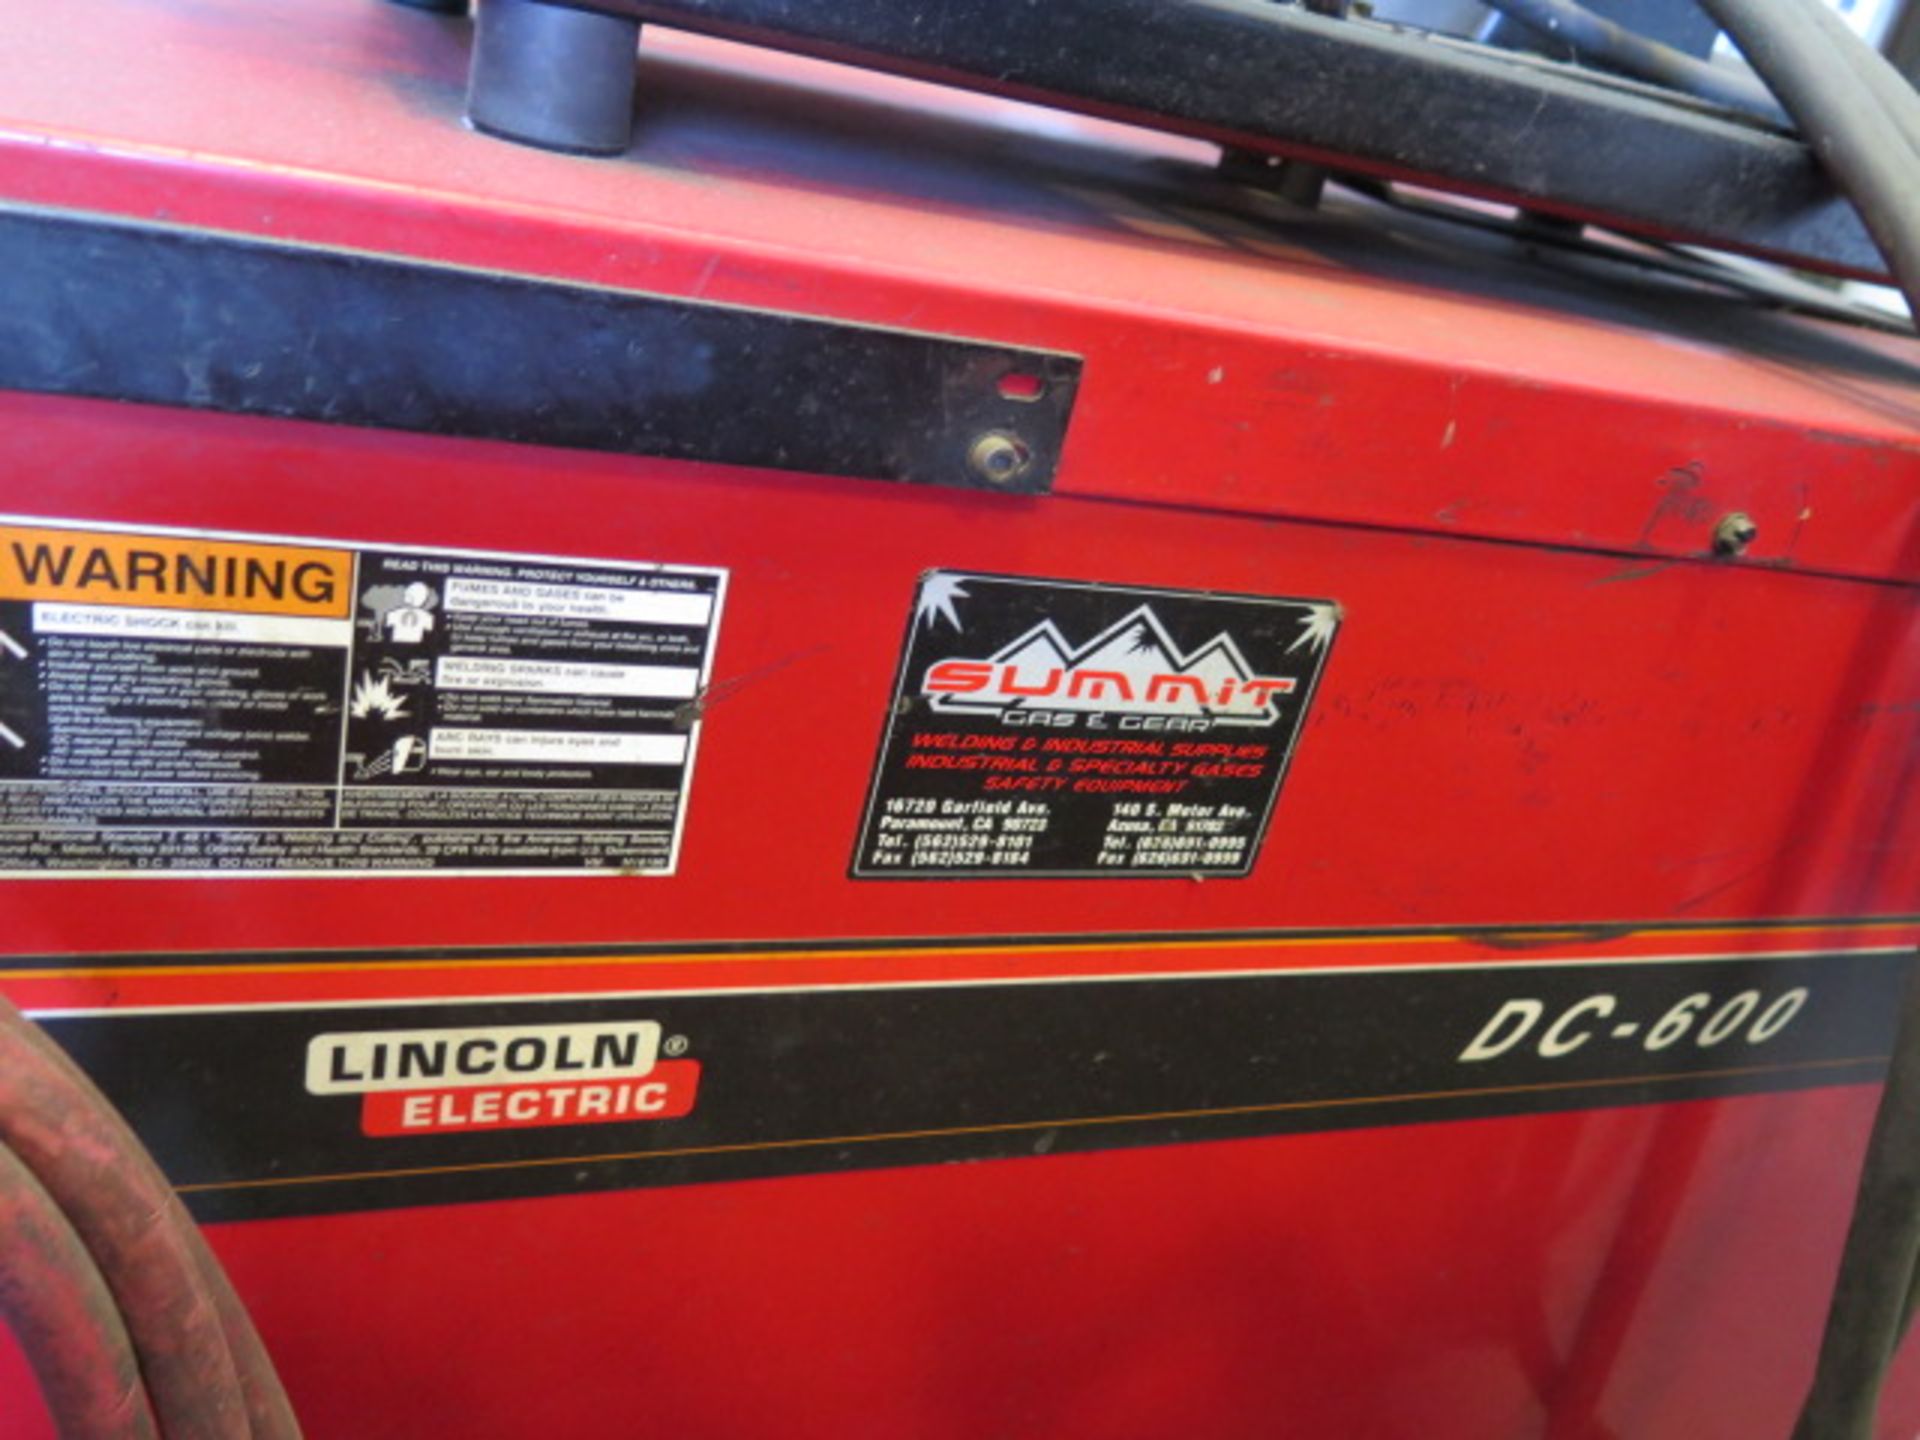 Lincoln DC-600 Arc Welding w/ Multi-Process Switch, Lincoln LF-74 Wire Feeder, SOLD AS IS - Image 8 of 8